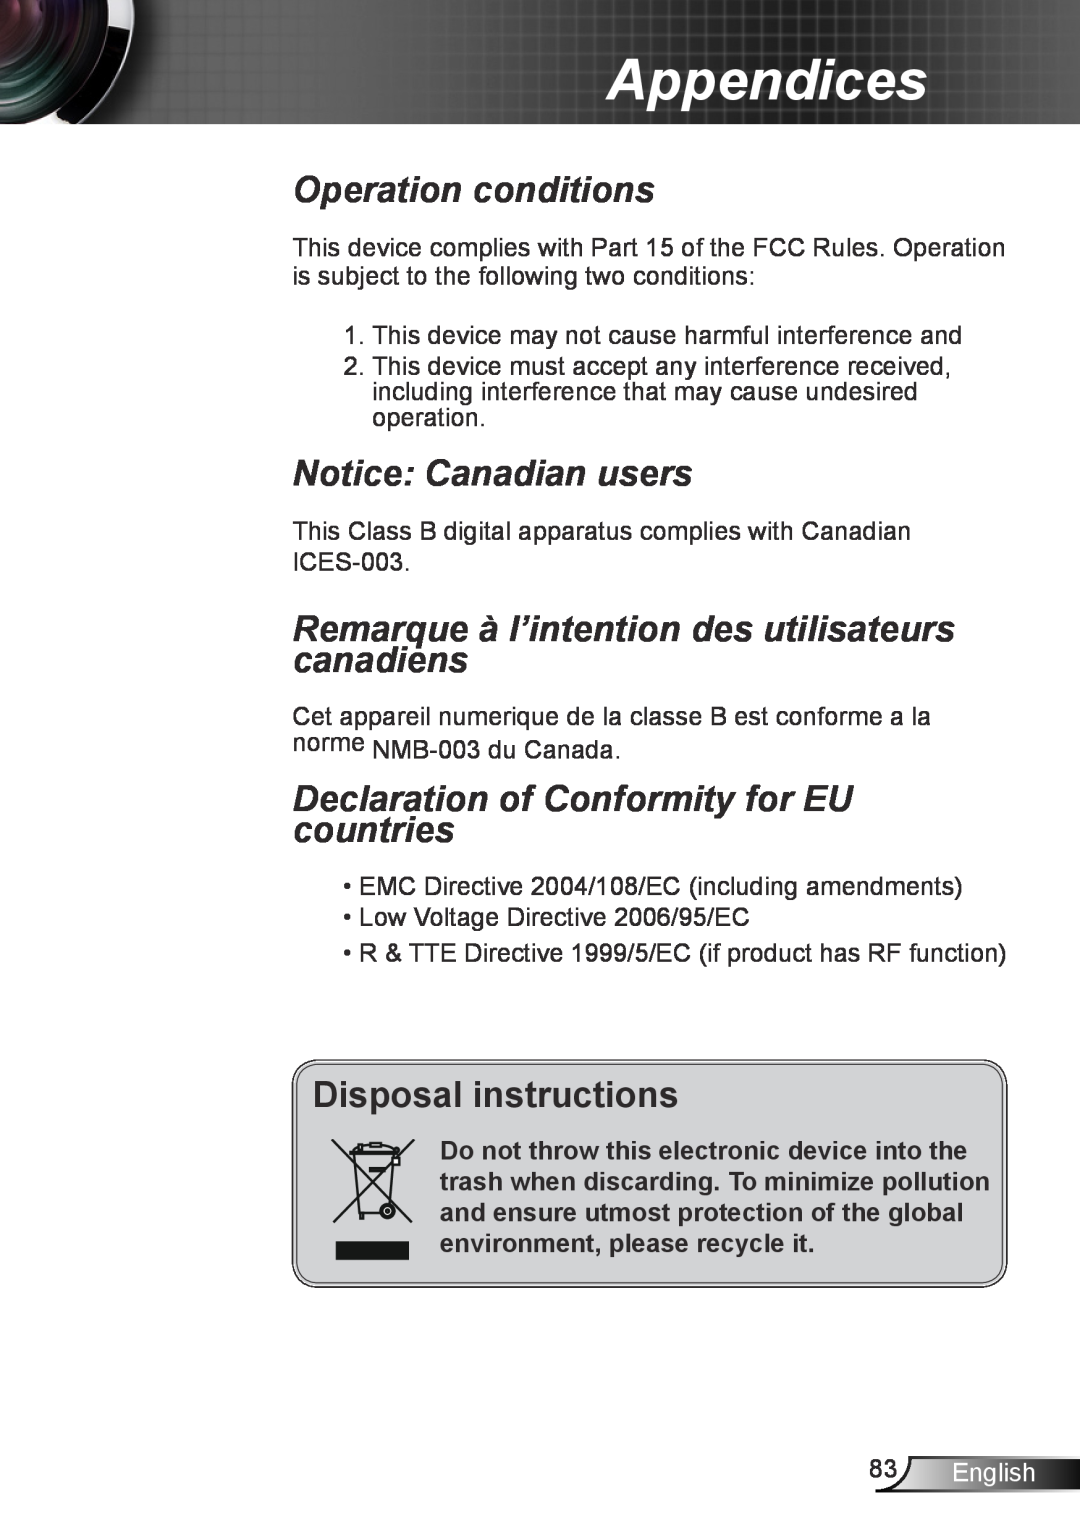 Optoma Technology TX6353D Operation conditions, Notice Canadian users, Remarque à l’intention des utilisateurs canadiens 